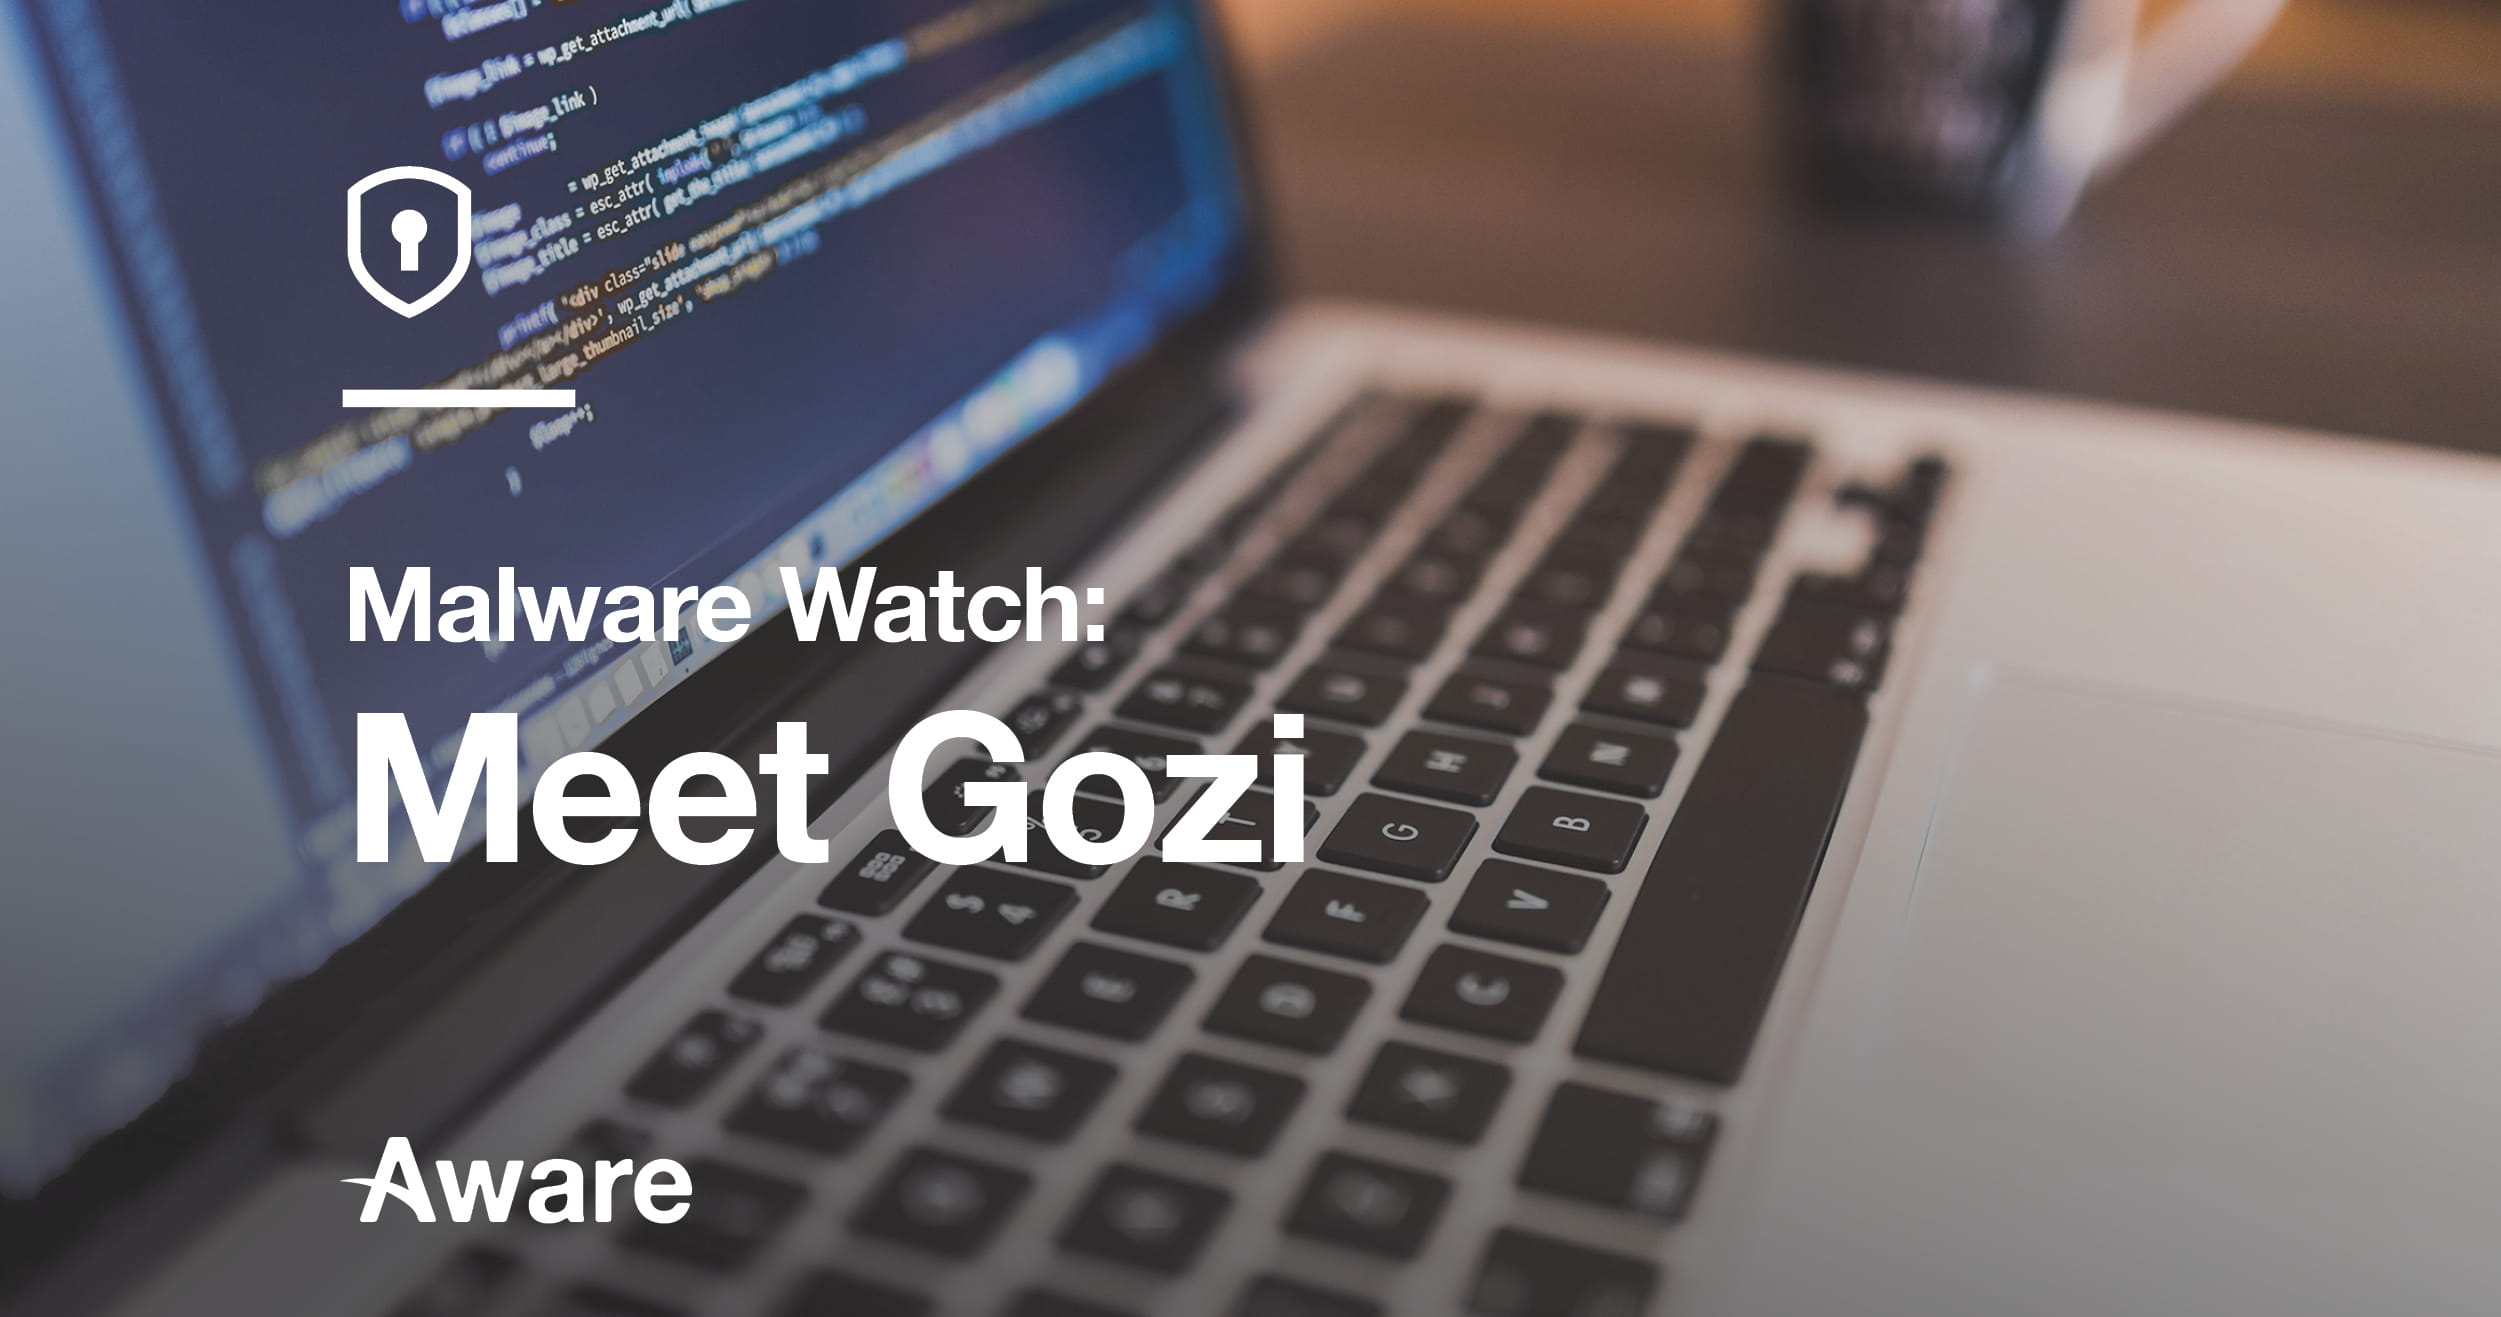 Meet Gozi: The Number 1 Financial Malware